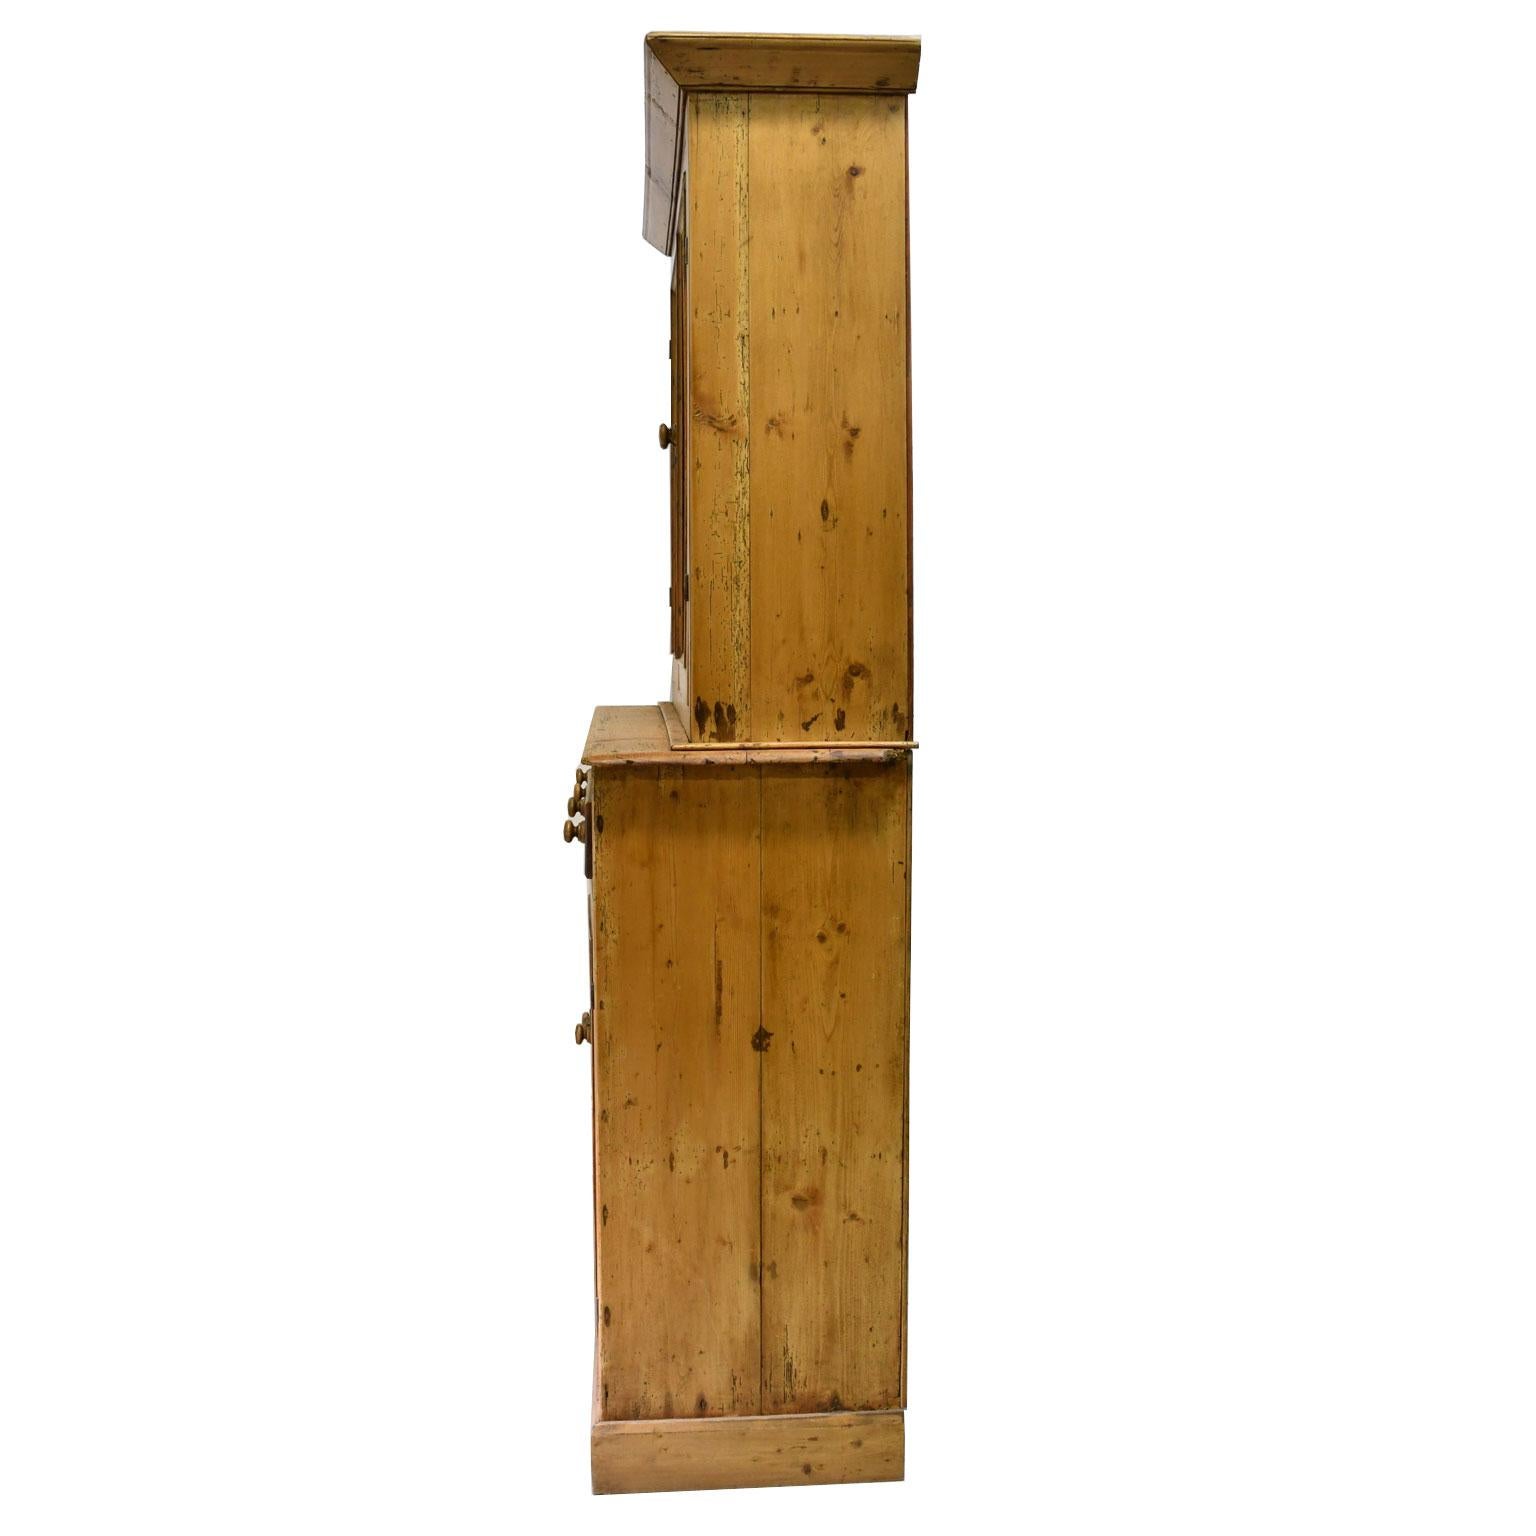 Hand-Crafted Rustic 19th Century English Country Cupboard in Pine with Glazed Doors